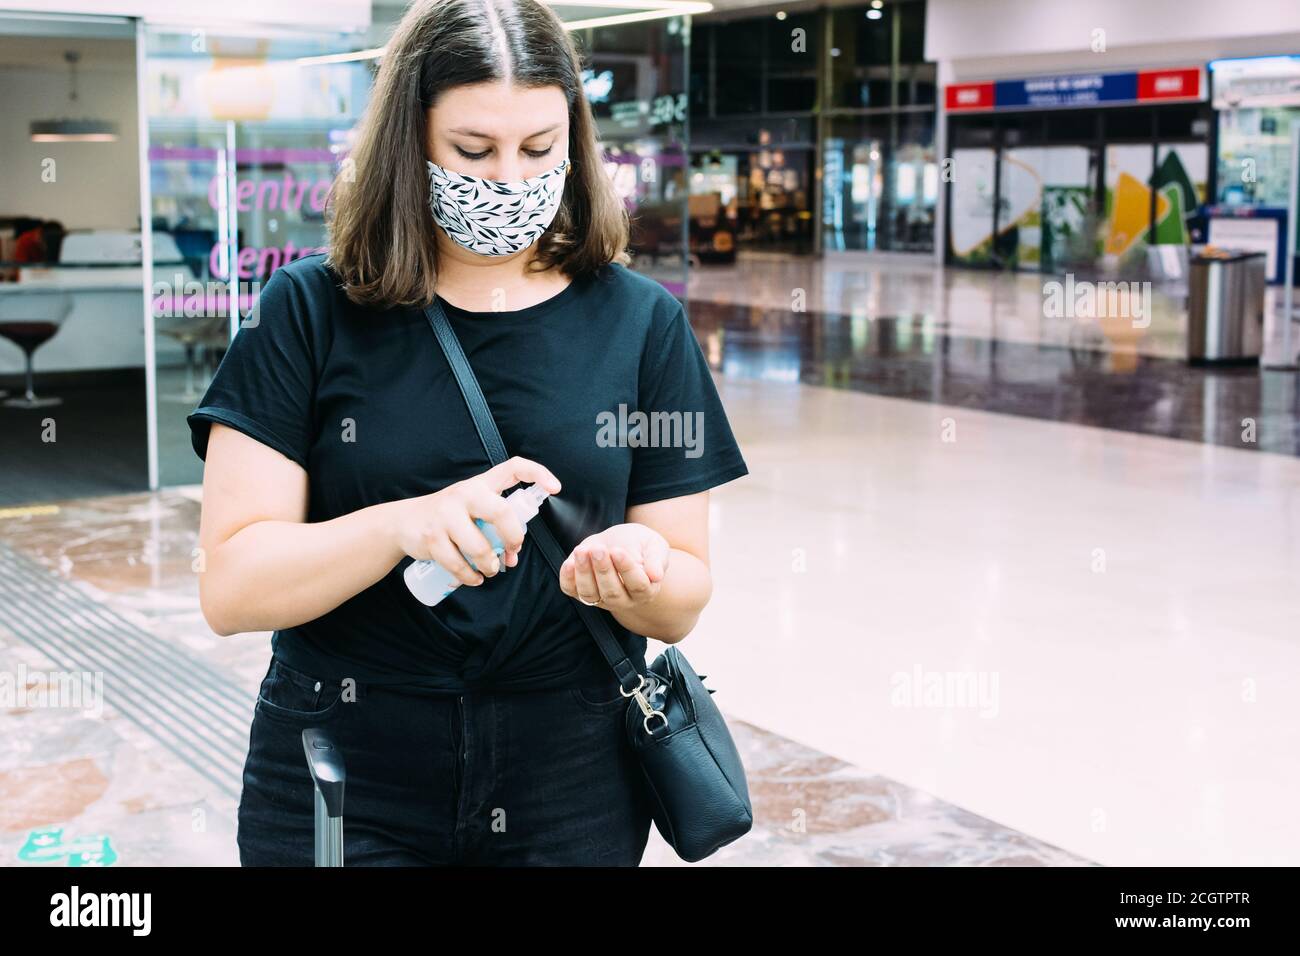 woman with a face mask disinfects her hands with hydro-alcoholic gel at the train station Stock Photo